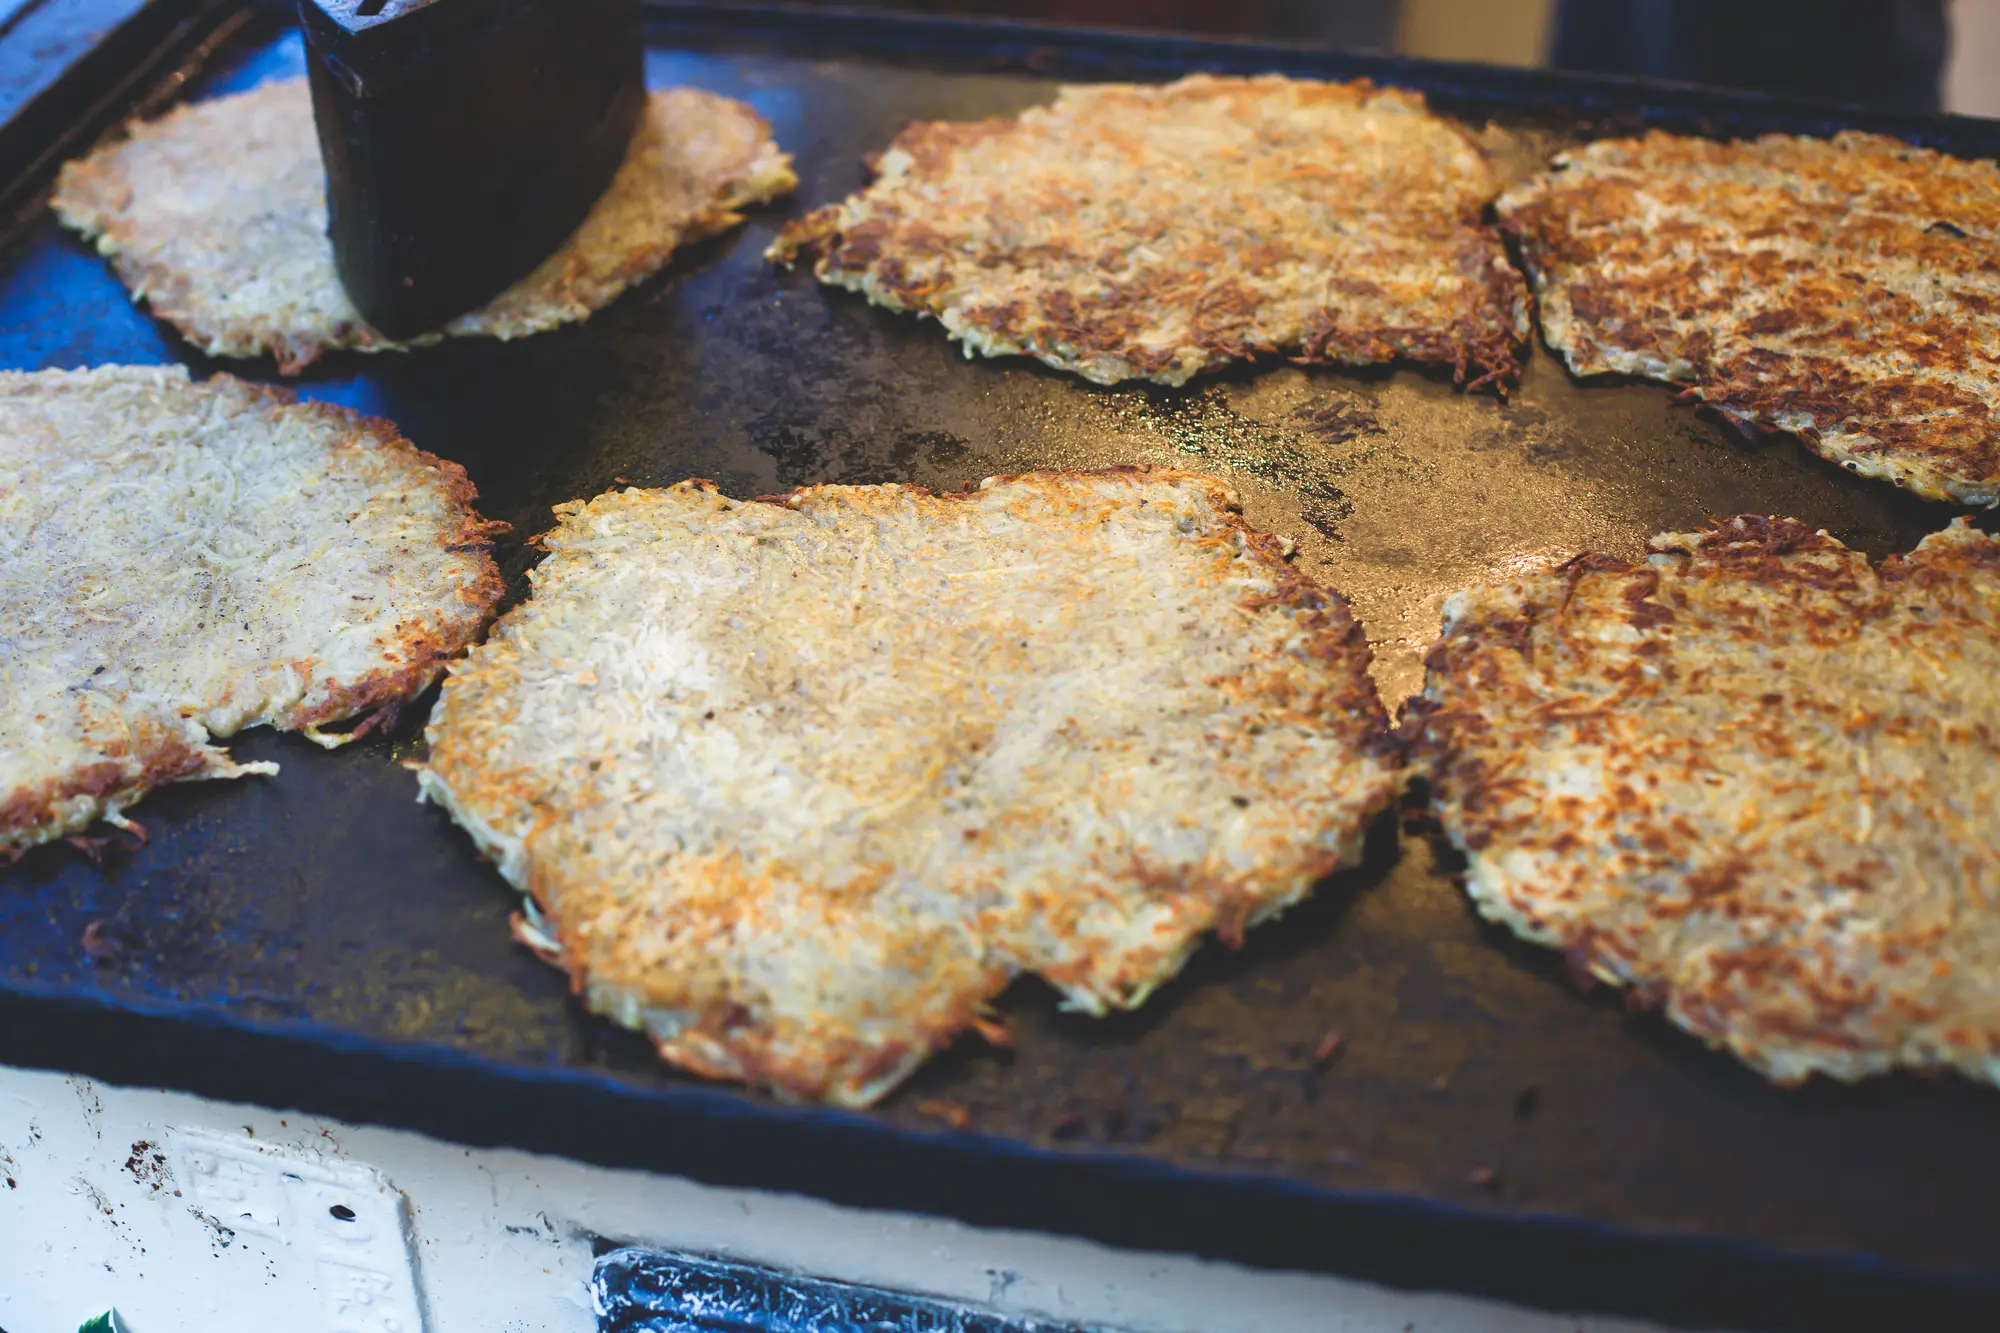 Six large Latke (potato pancakes) on a black grill at a street food market in Budapest.